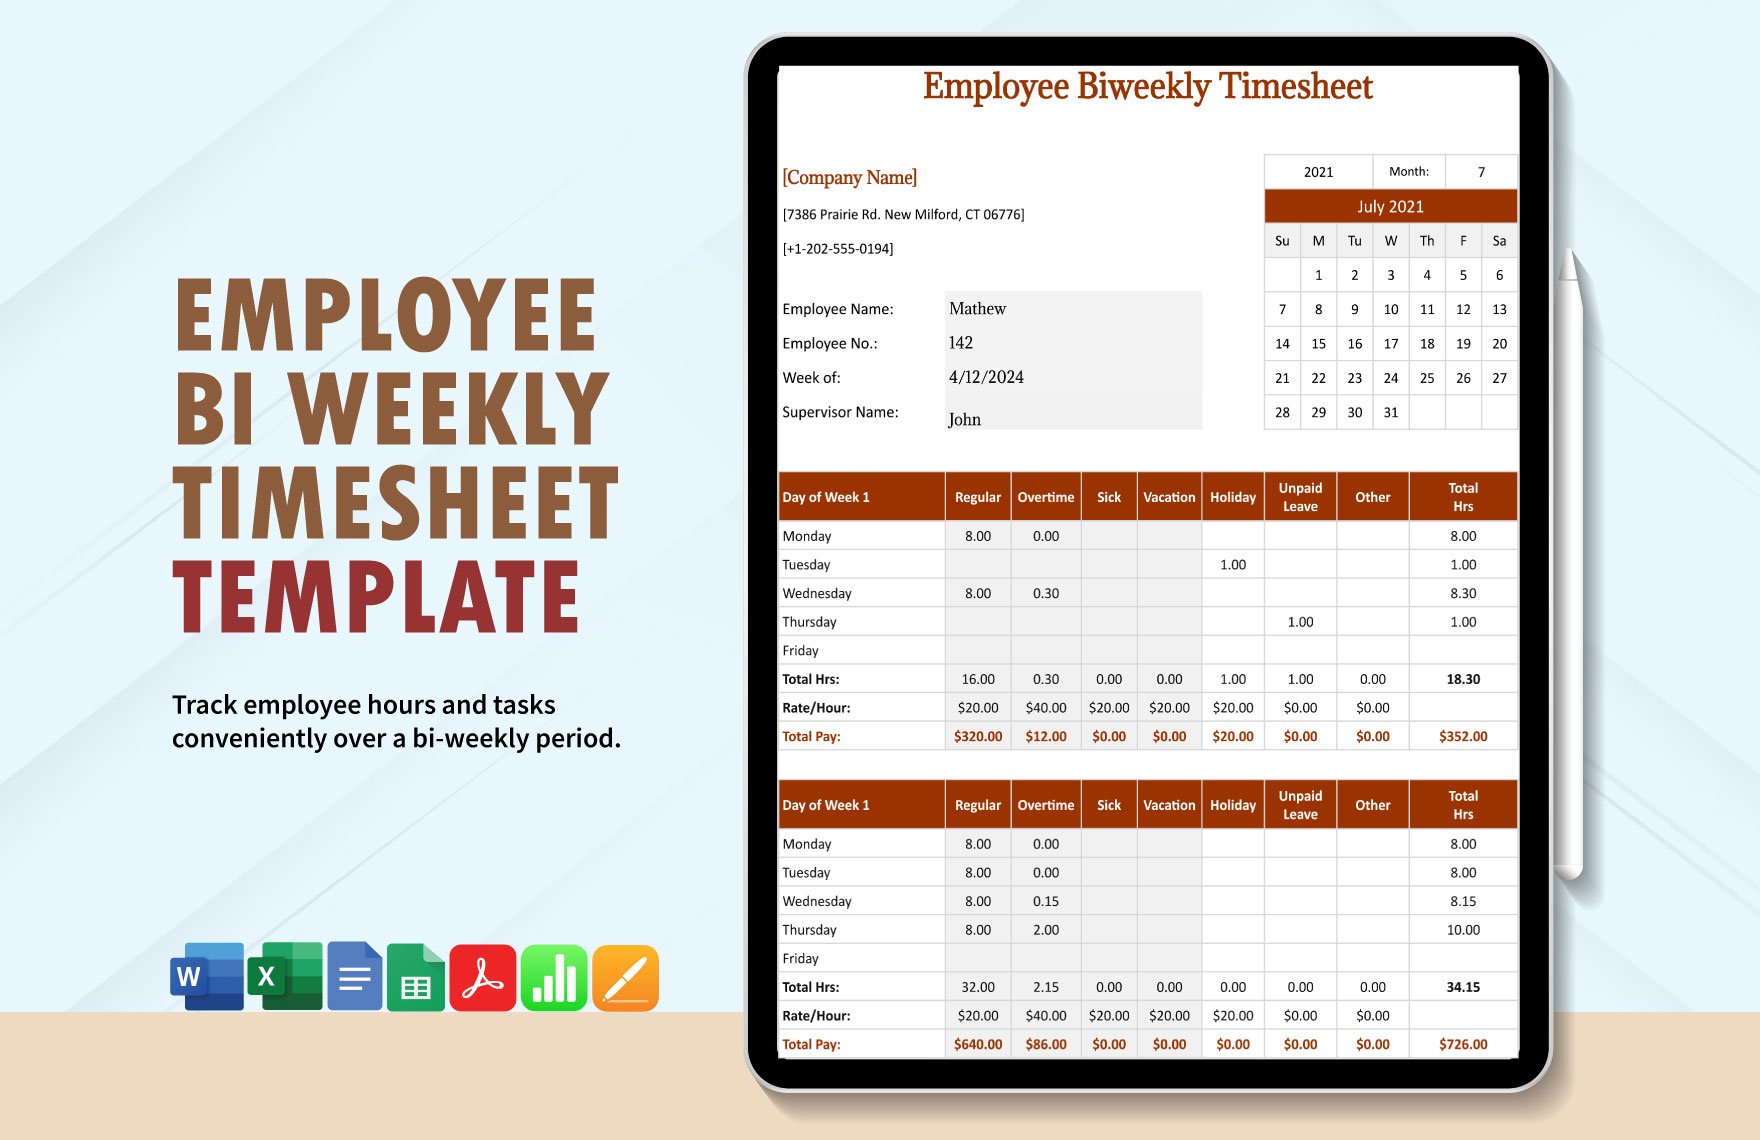 Employee Bi weekly Timesheet Template in Word, Google Docs, Excel, PDF, Google Sheets, Apple Pages, Apple Numbers